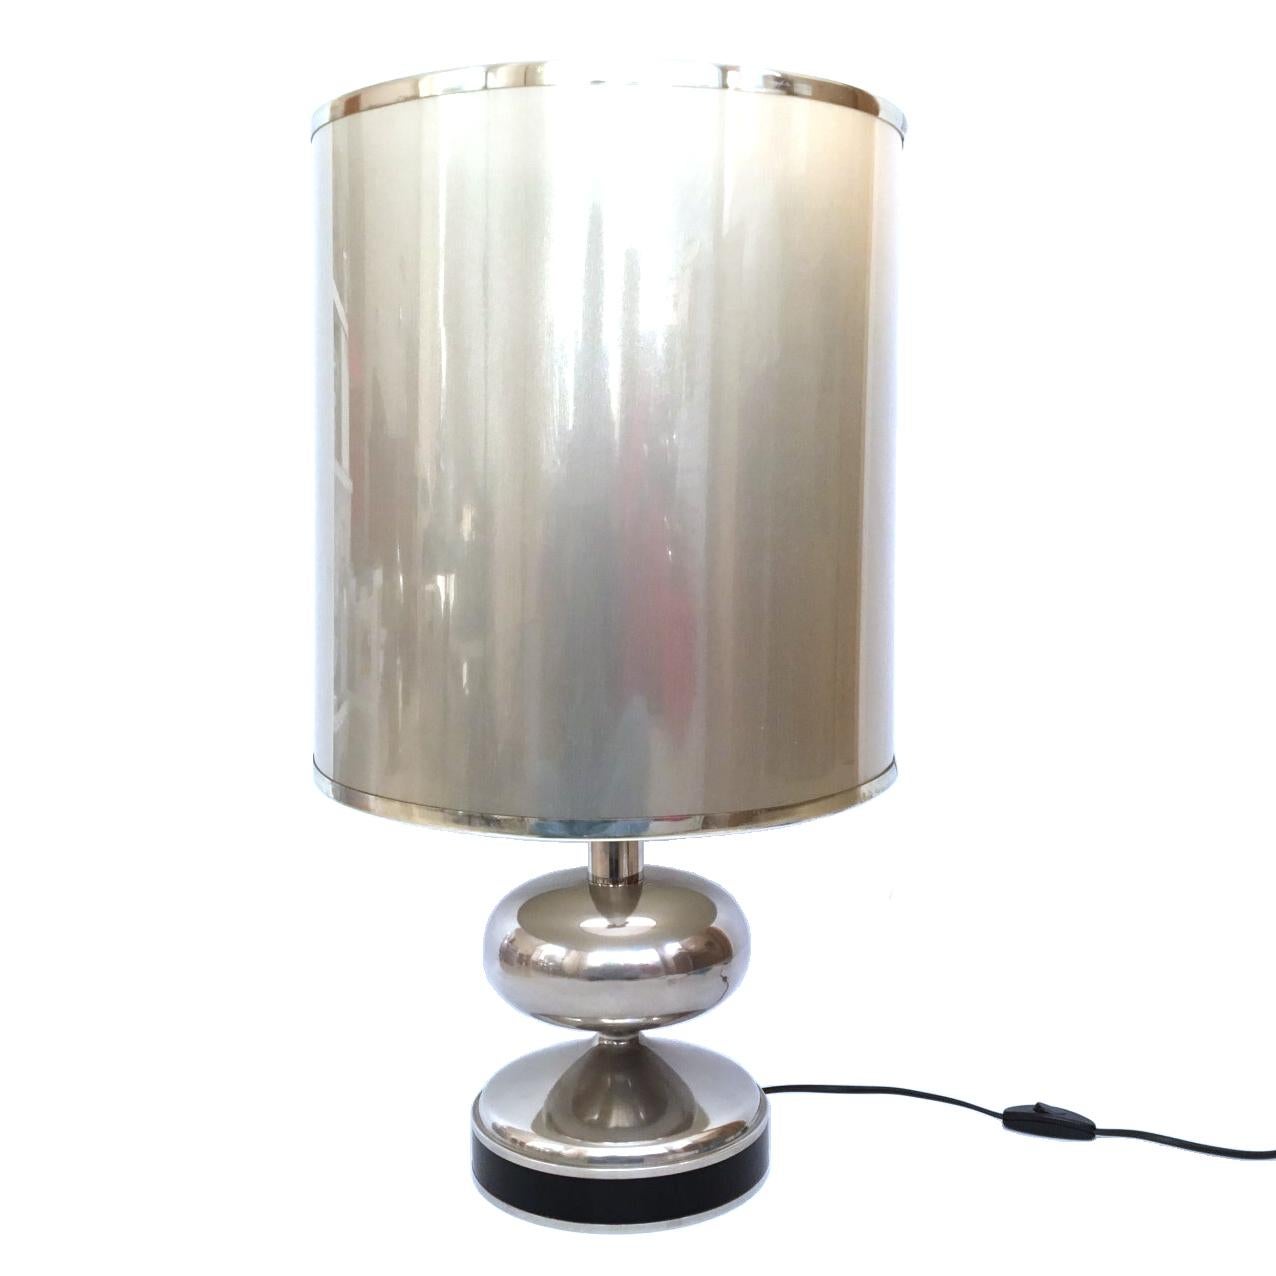 Late 20th Century Pair of Midcentury Chromed and Black Enamel Spanish Table Lamps, 1970s For Sale